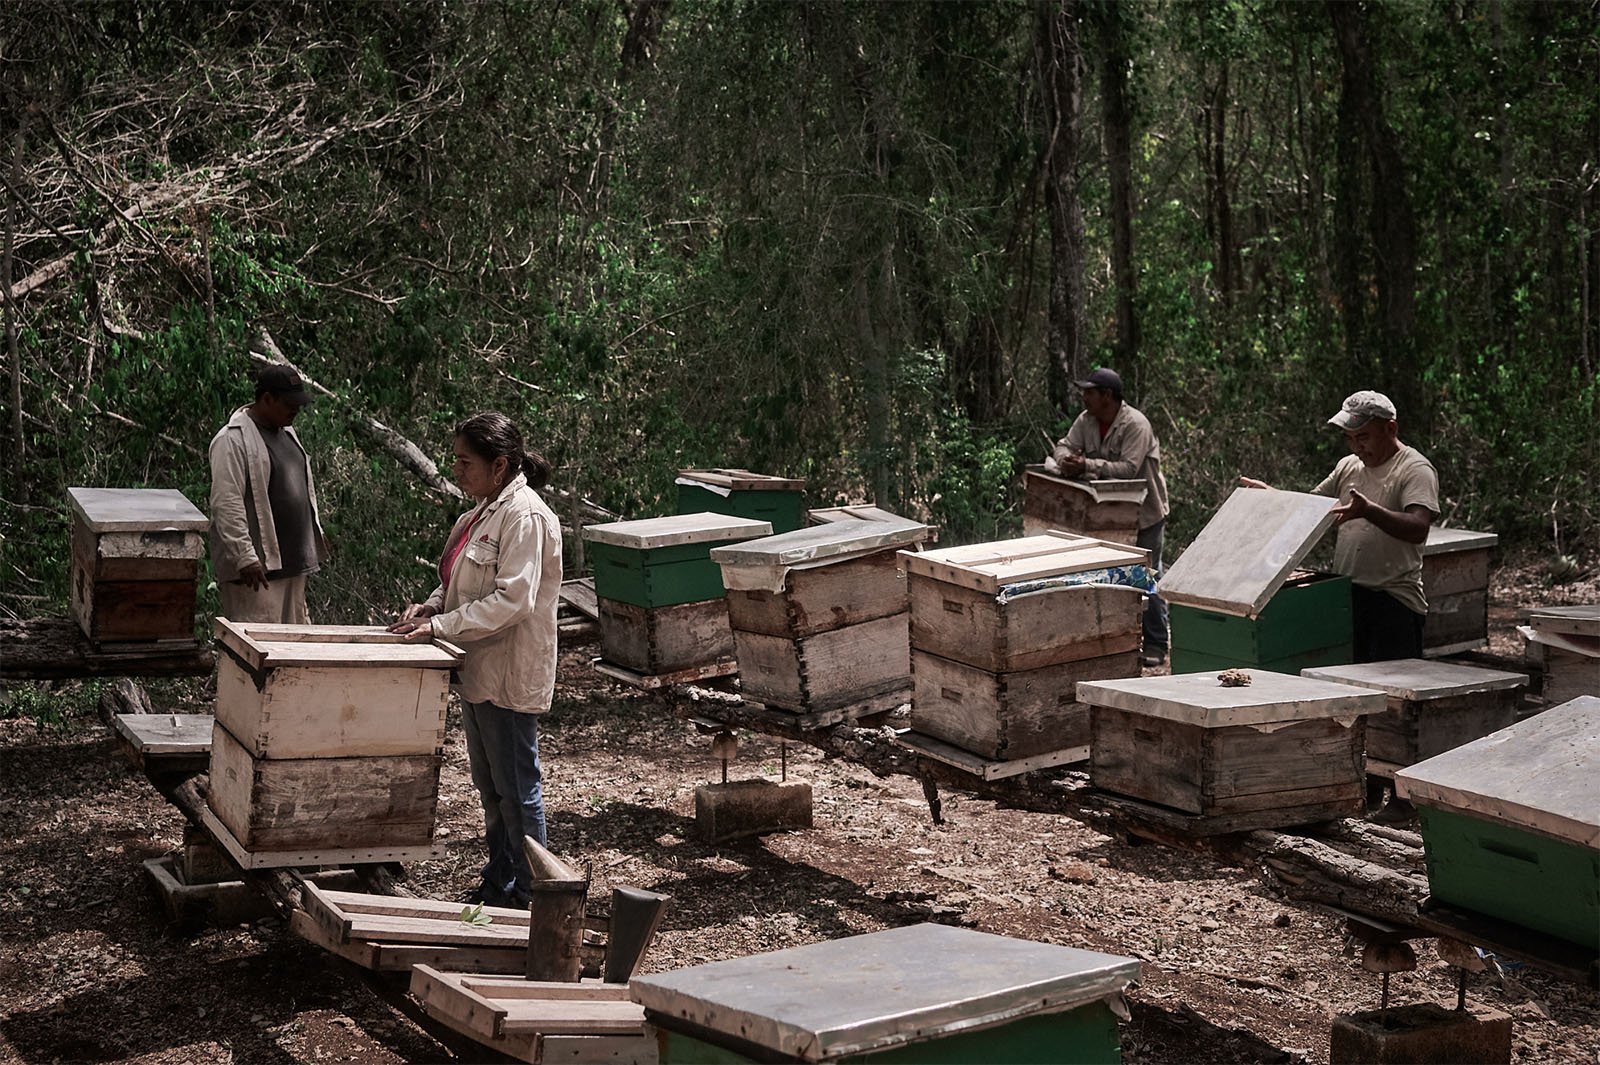 Four beekeepers care for beehives in a forest, inspecting and managing the structures surrounded by trees and underbrush.